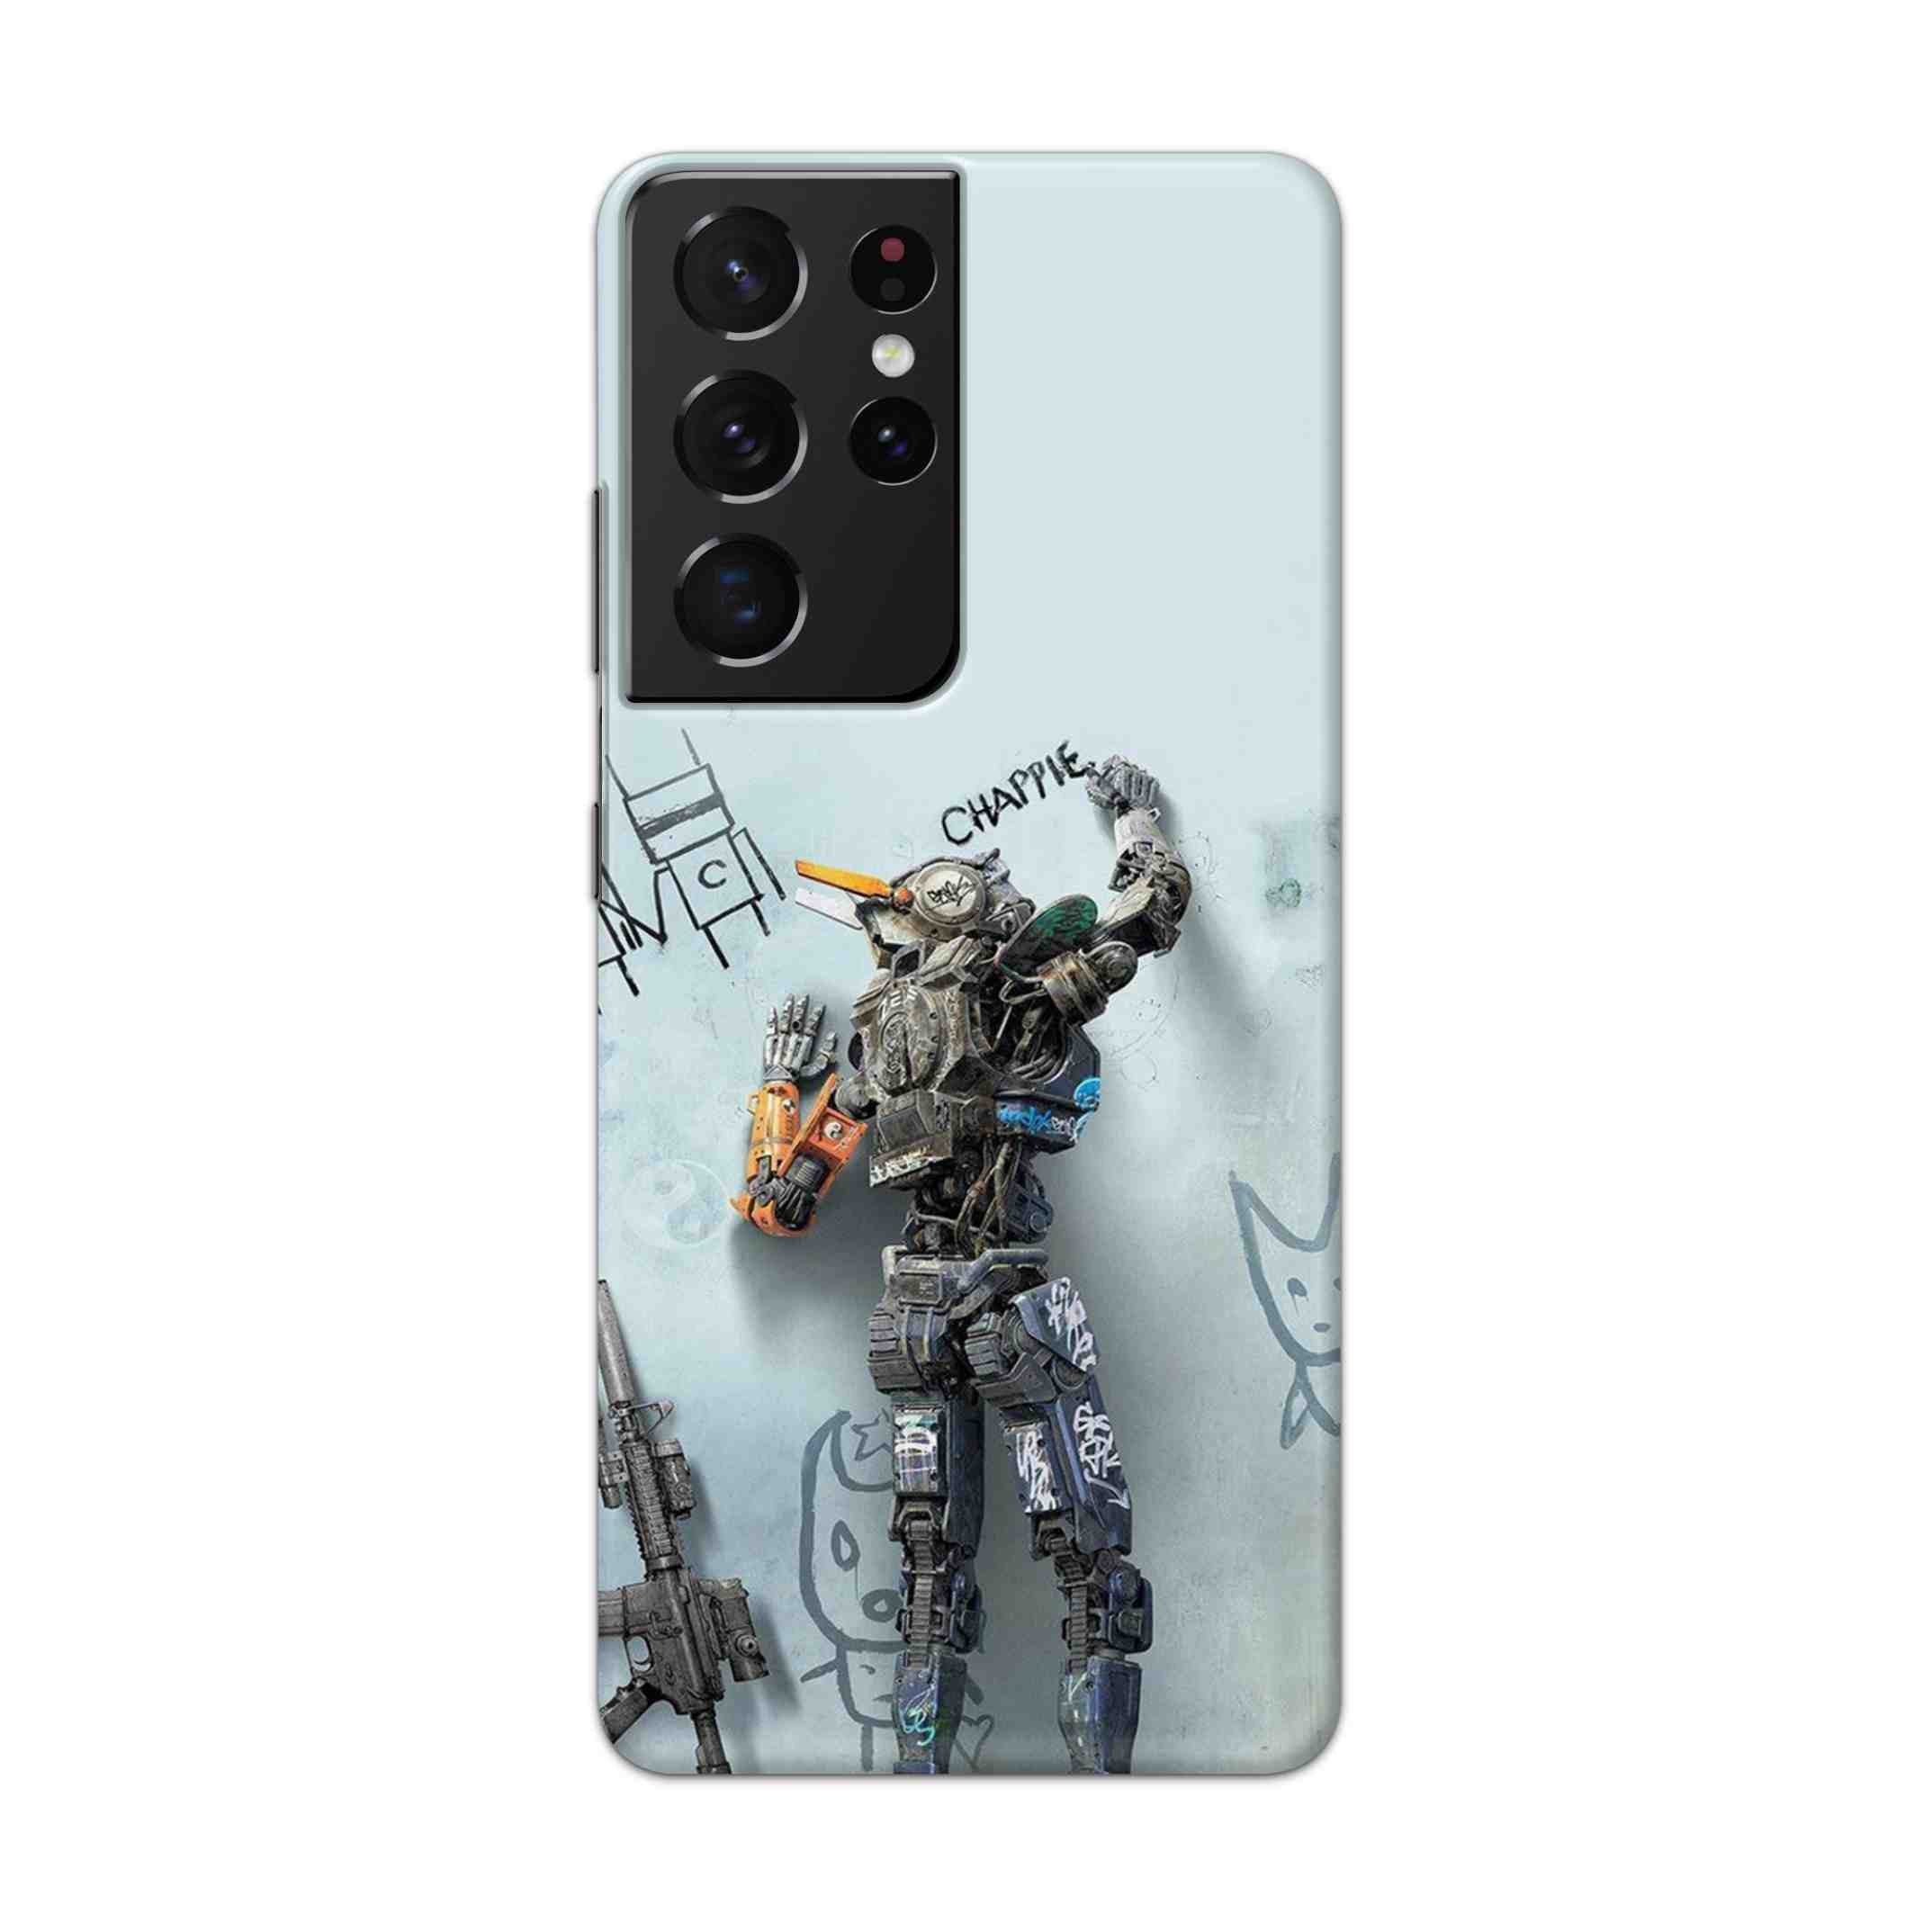 Buy Chappie Hard Back Mobile Phone Case Cover For Samsung Galaxy S21 Ultra Online